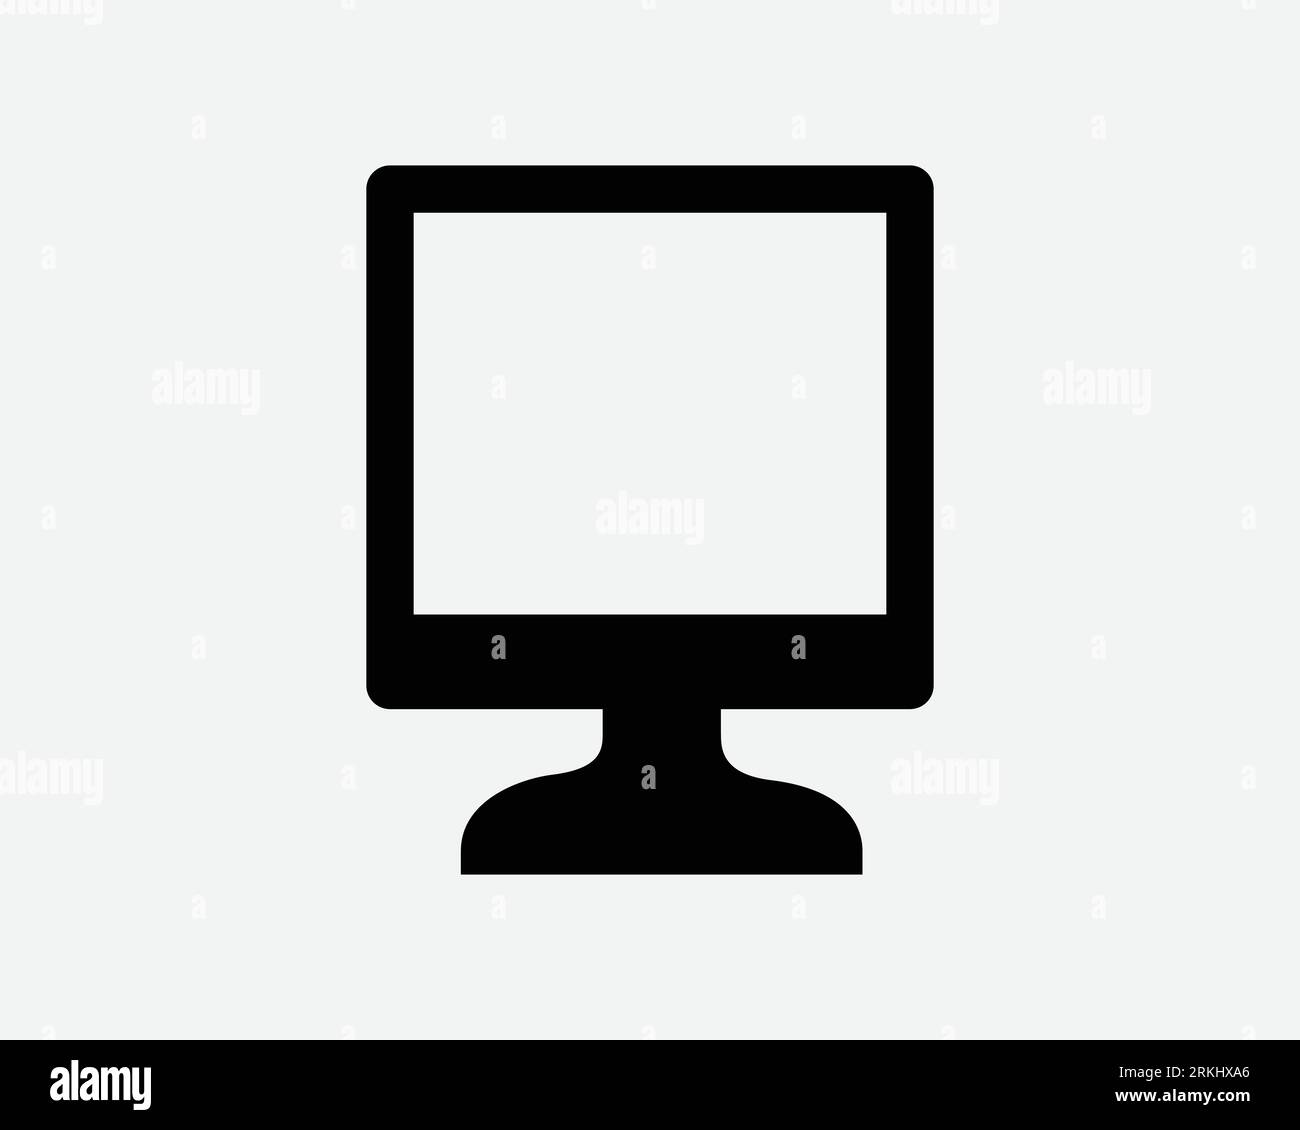 Monitor Screen Icon Computer Desktop LED LCD Display TV Television Black White Outline Shape Vector Clipart Graphic Illustration Artwork Sign Symbol Stock Vector